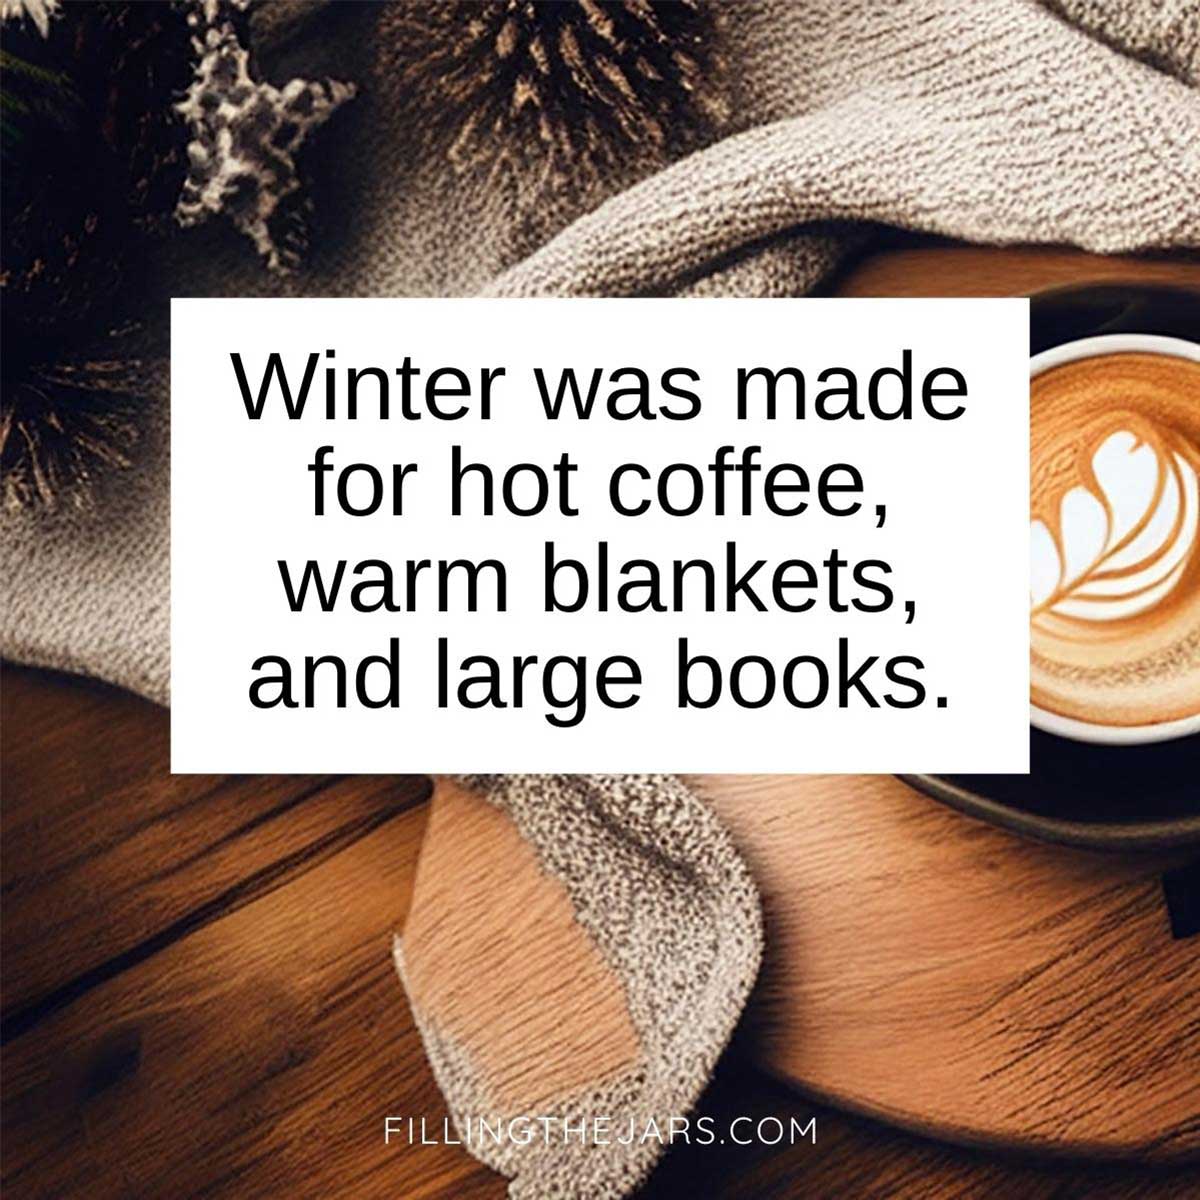 Hot coffee for cold weather quote in black text on white background over cozy winter coffee flatlay.